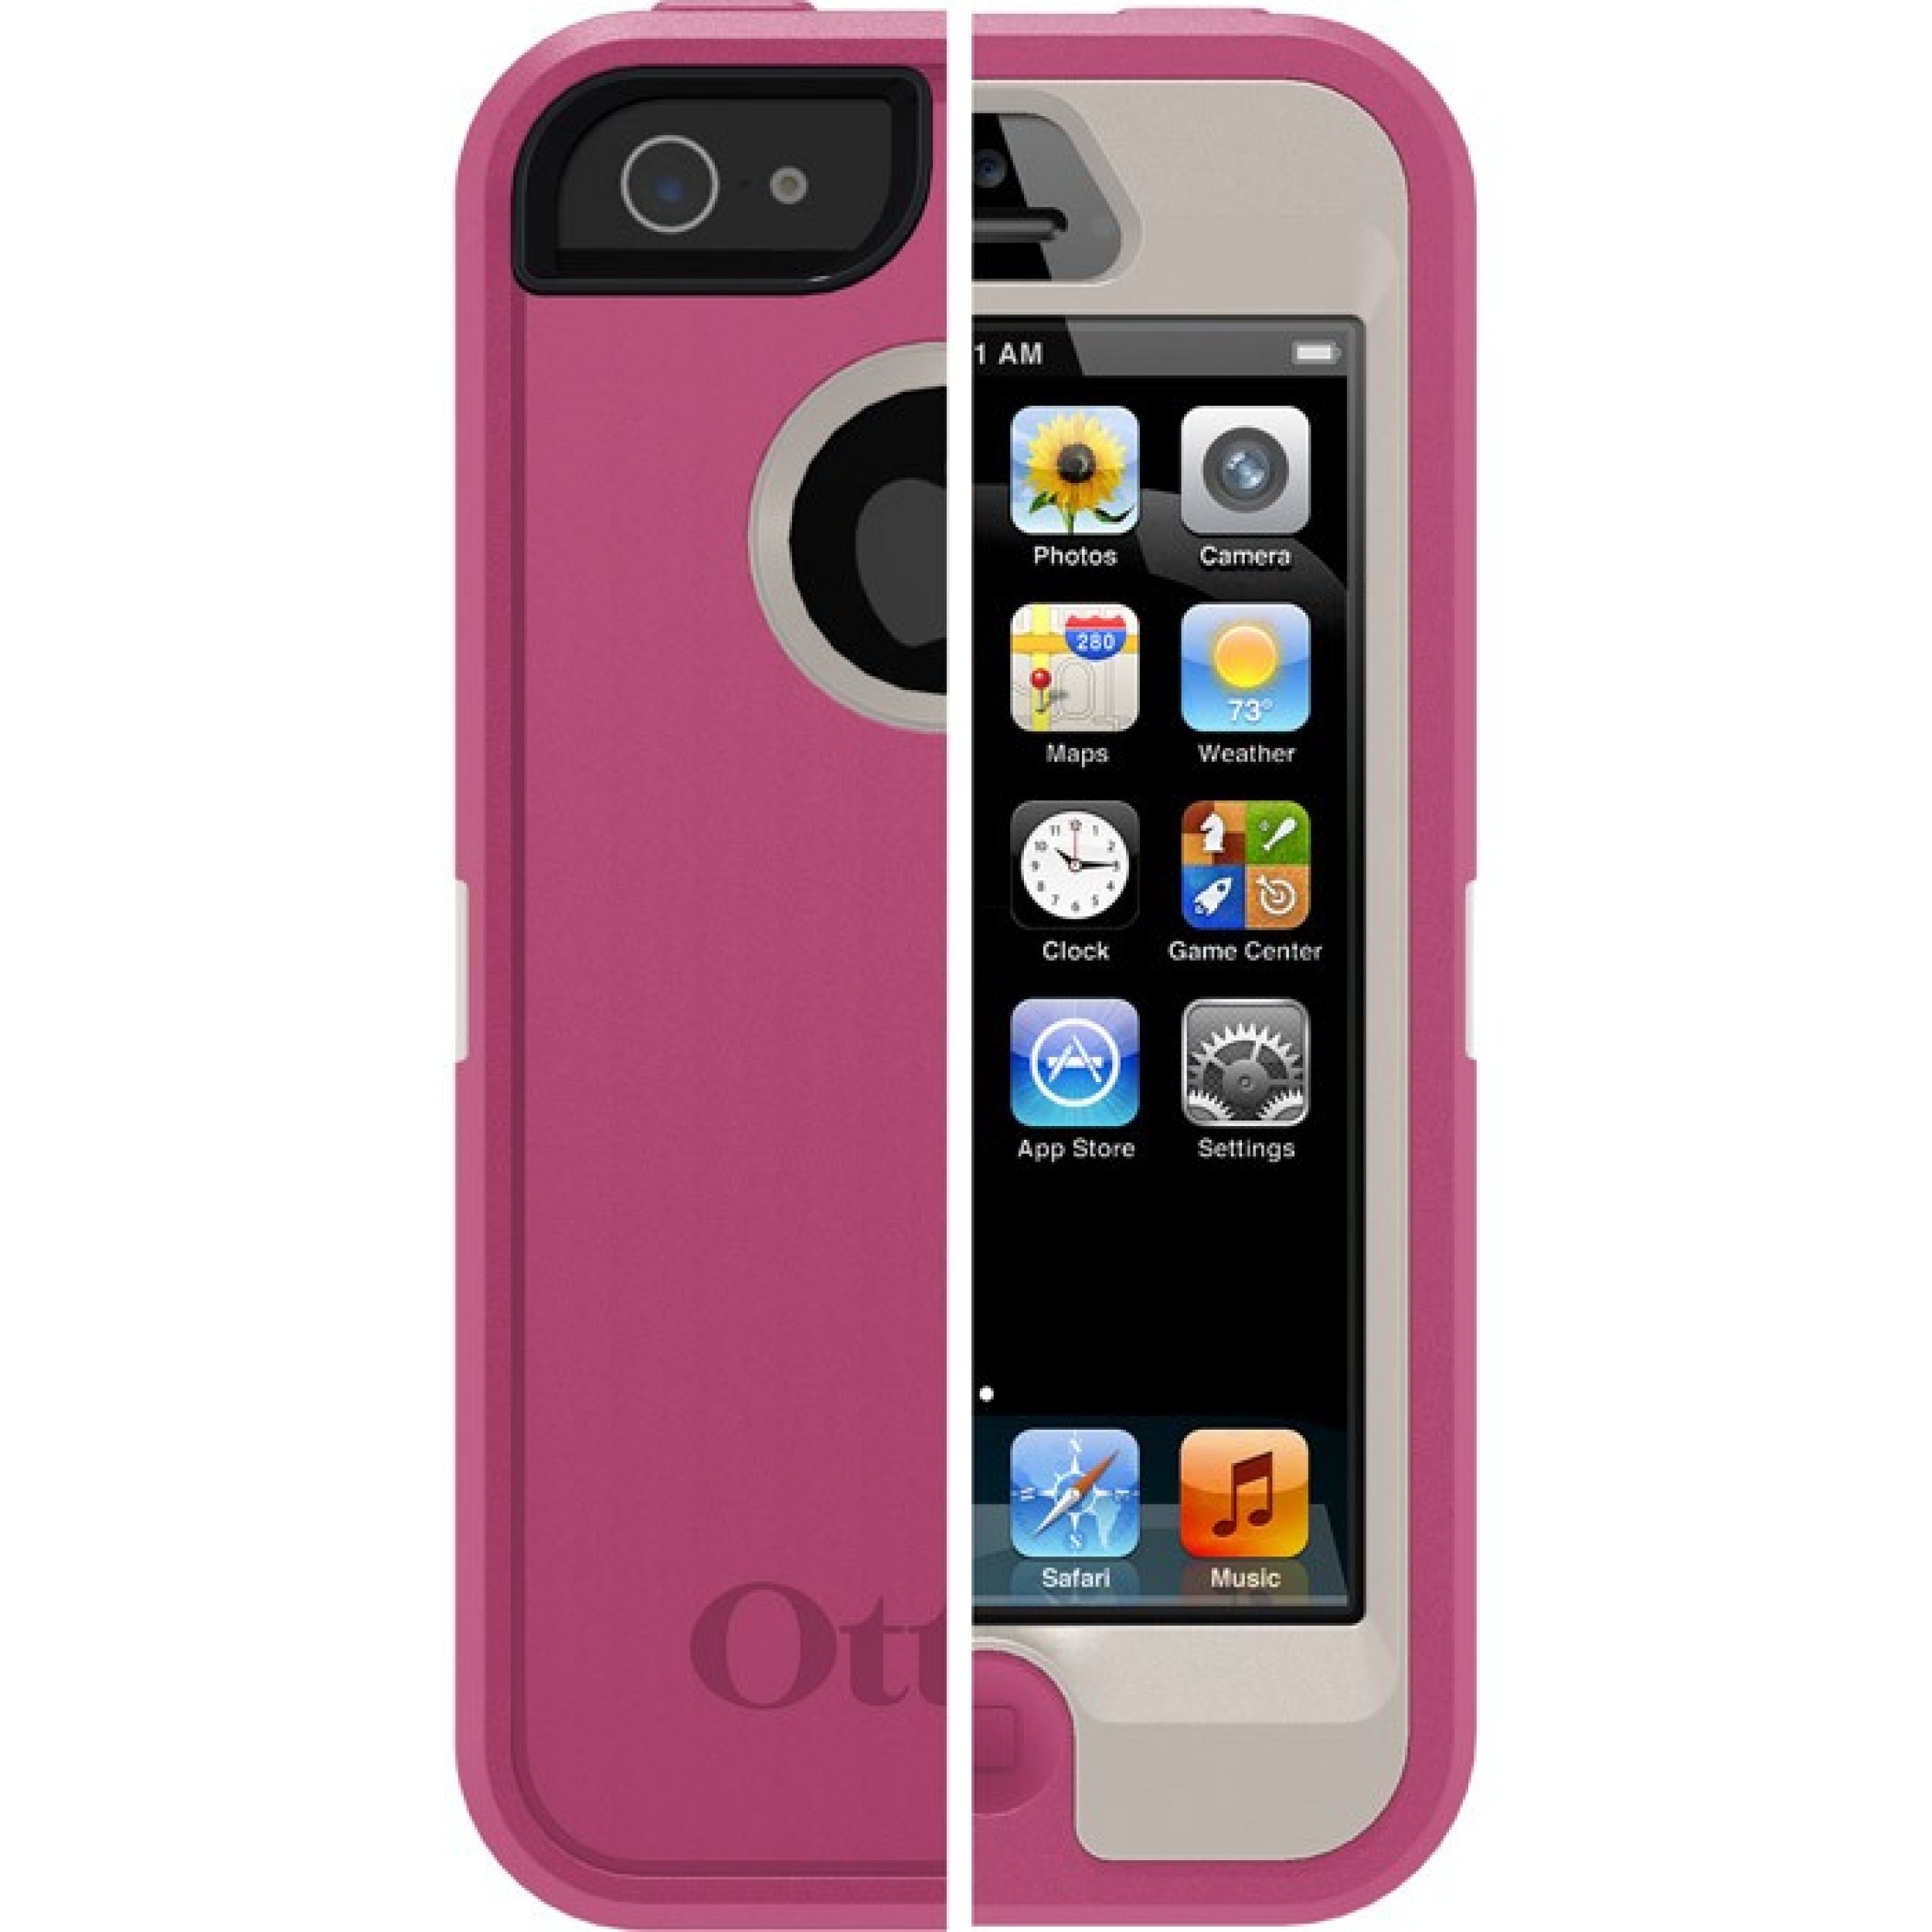 5. Otterbox iPhone 5 Defender Series Case - Available for 49.95 